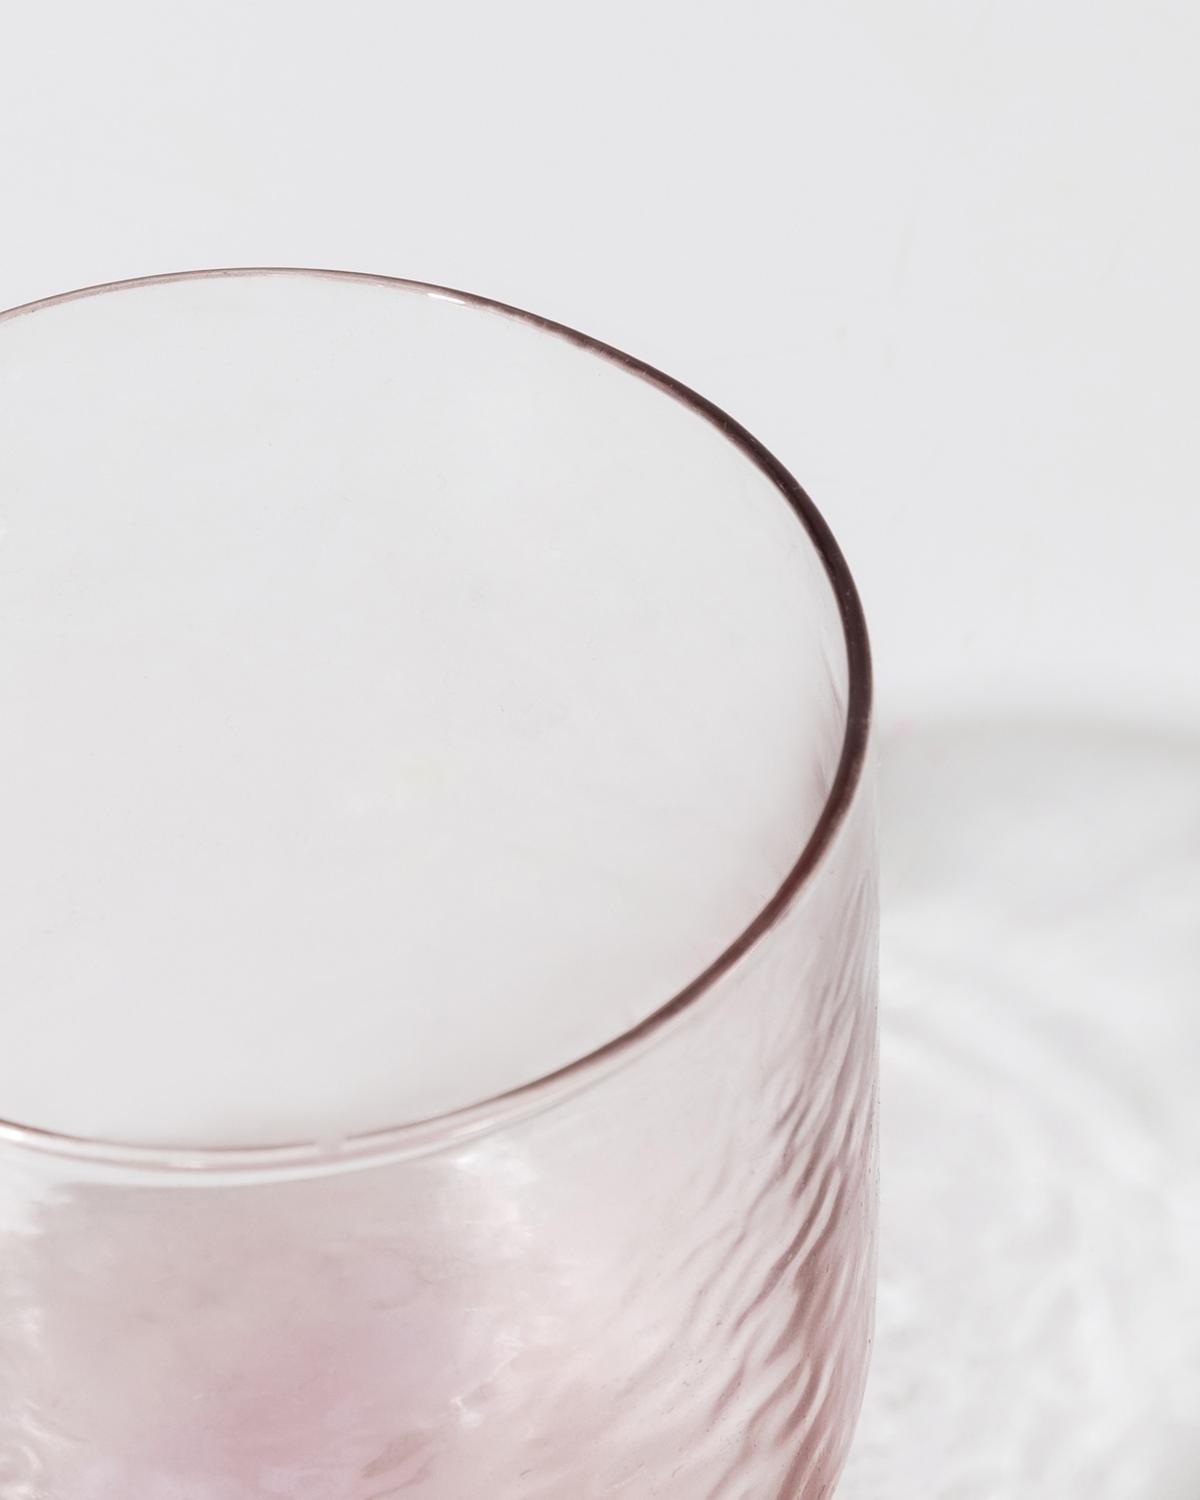 Hammered Short Tumbler -  Dusty Pink